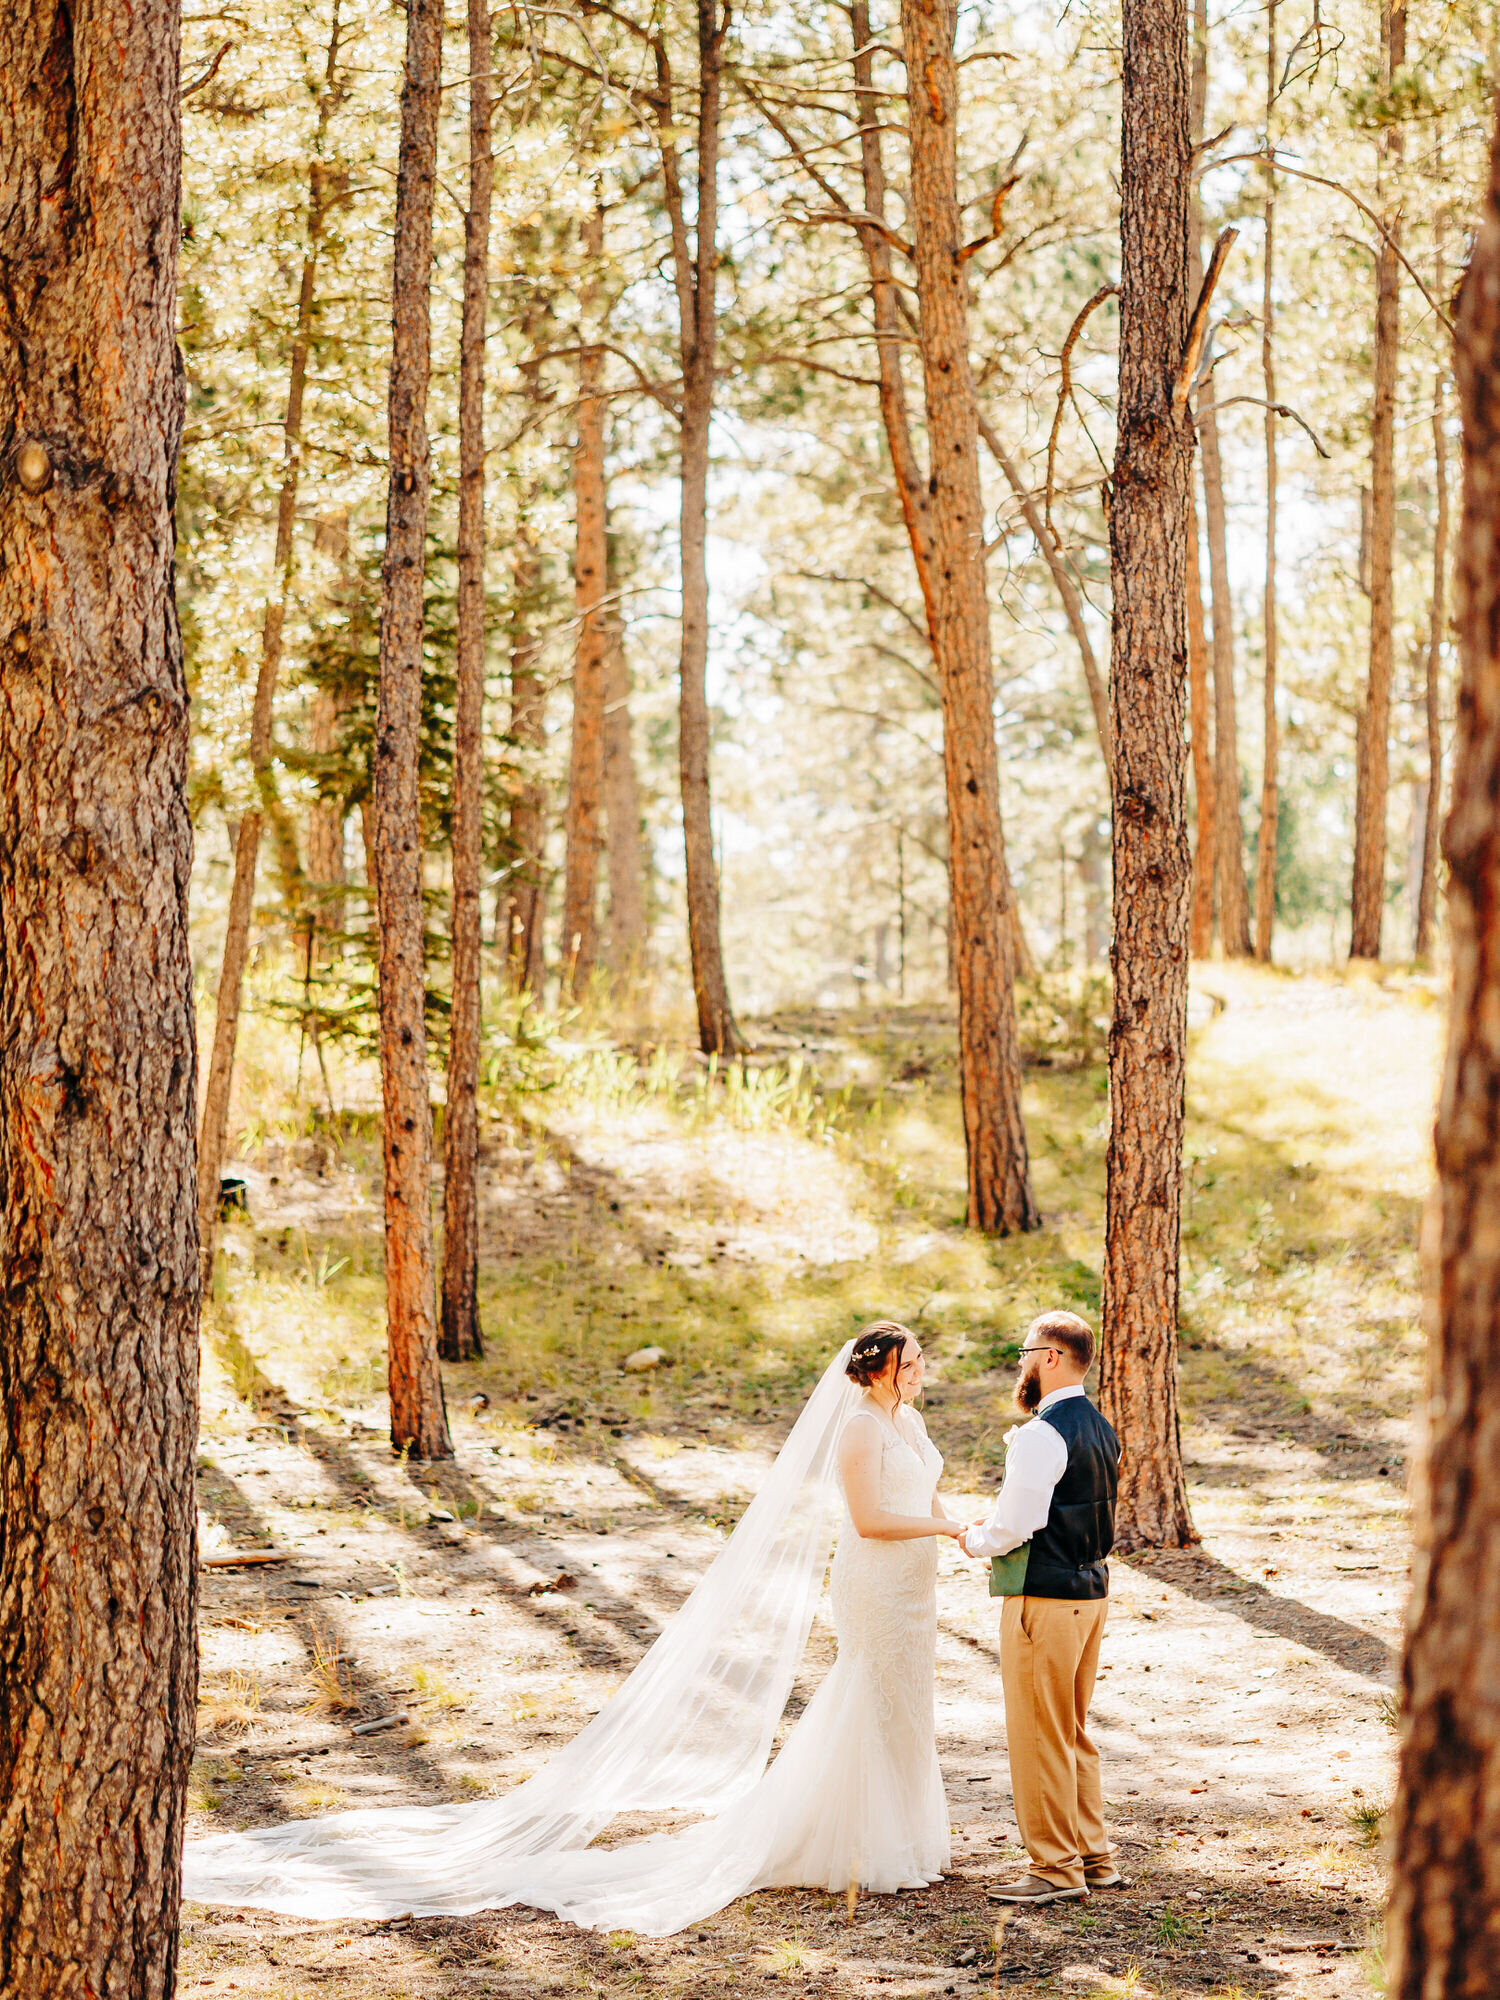 A couple stands in a forest in Colorado wearing their wedding attire. The bride has a long veil and a long train on her dress. The groom wears a green vest.